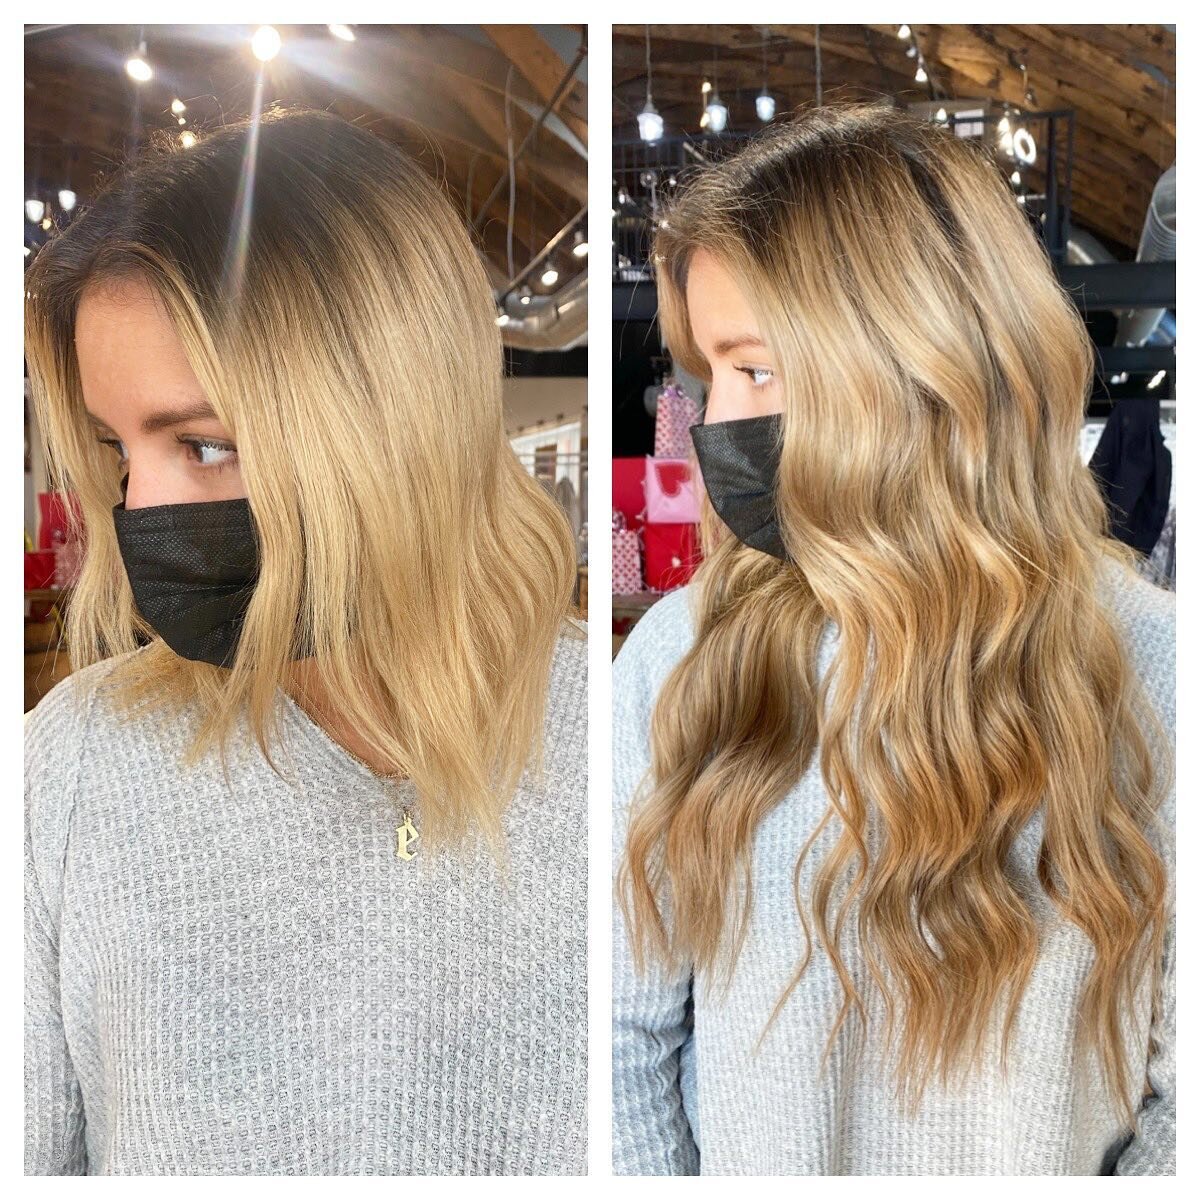 A rooted balayage look with 20&rdquo; @bellamihair hand tied wefts to give that DREAM HAIR ✨

.

I will be adding extensions to my service menu here SOON!! If you have any questions call 314-733-5488 or DM me 🤗 
(extension consultations are free)